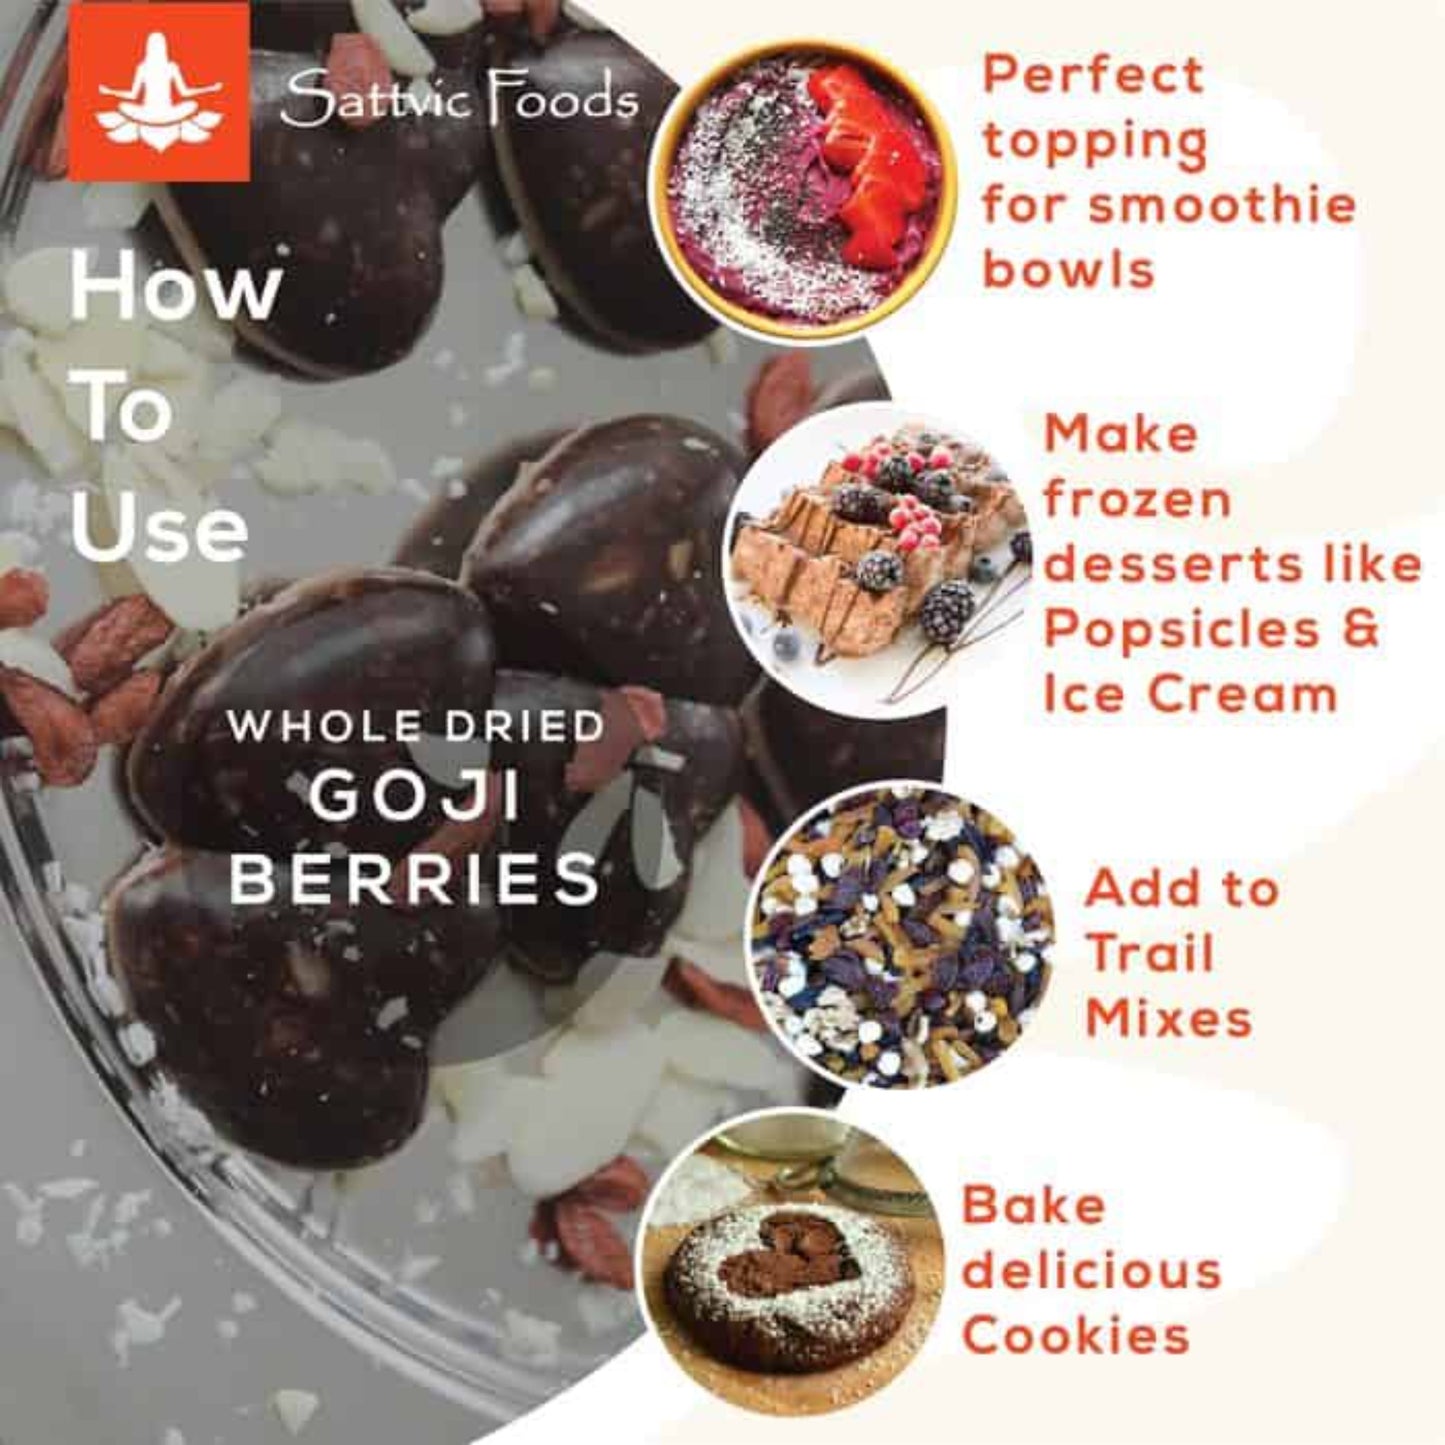 Goji Berries - How to Use